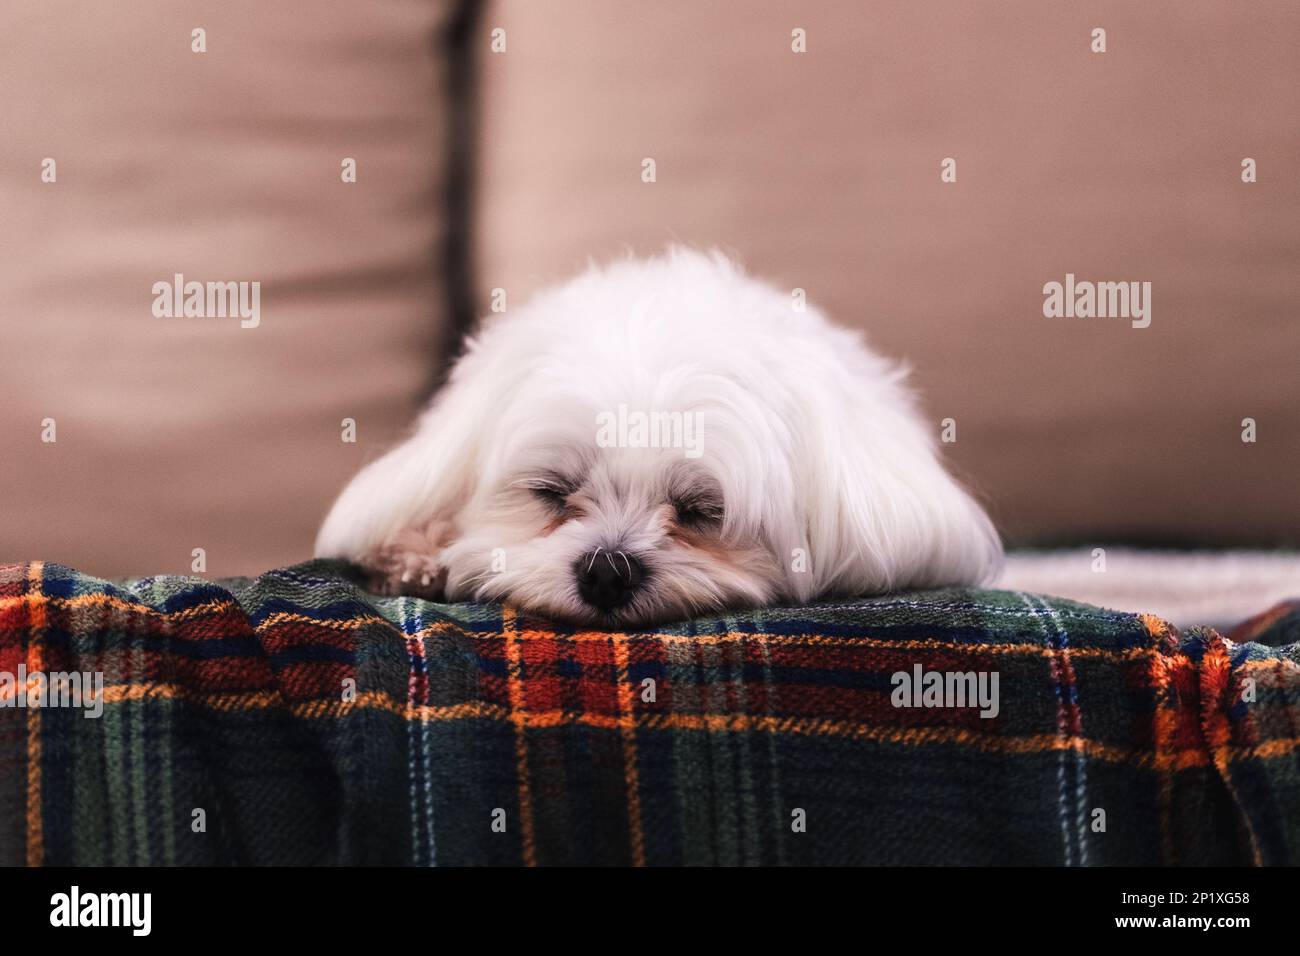 A close up portrait of a cute small white boomer dog lying down on a couch on a cosy blanket. The domestic animal is barely awake, but is still lookin Stock Photo